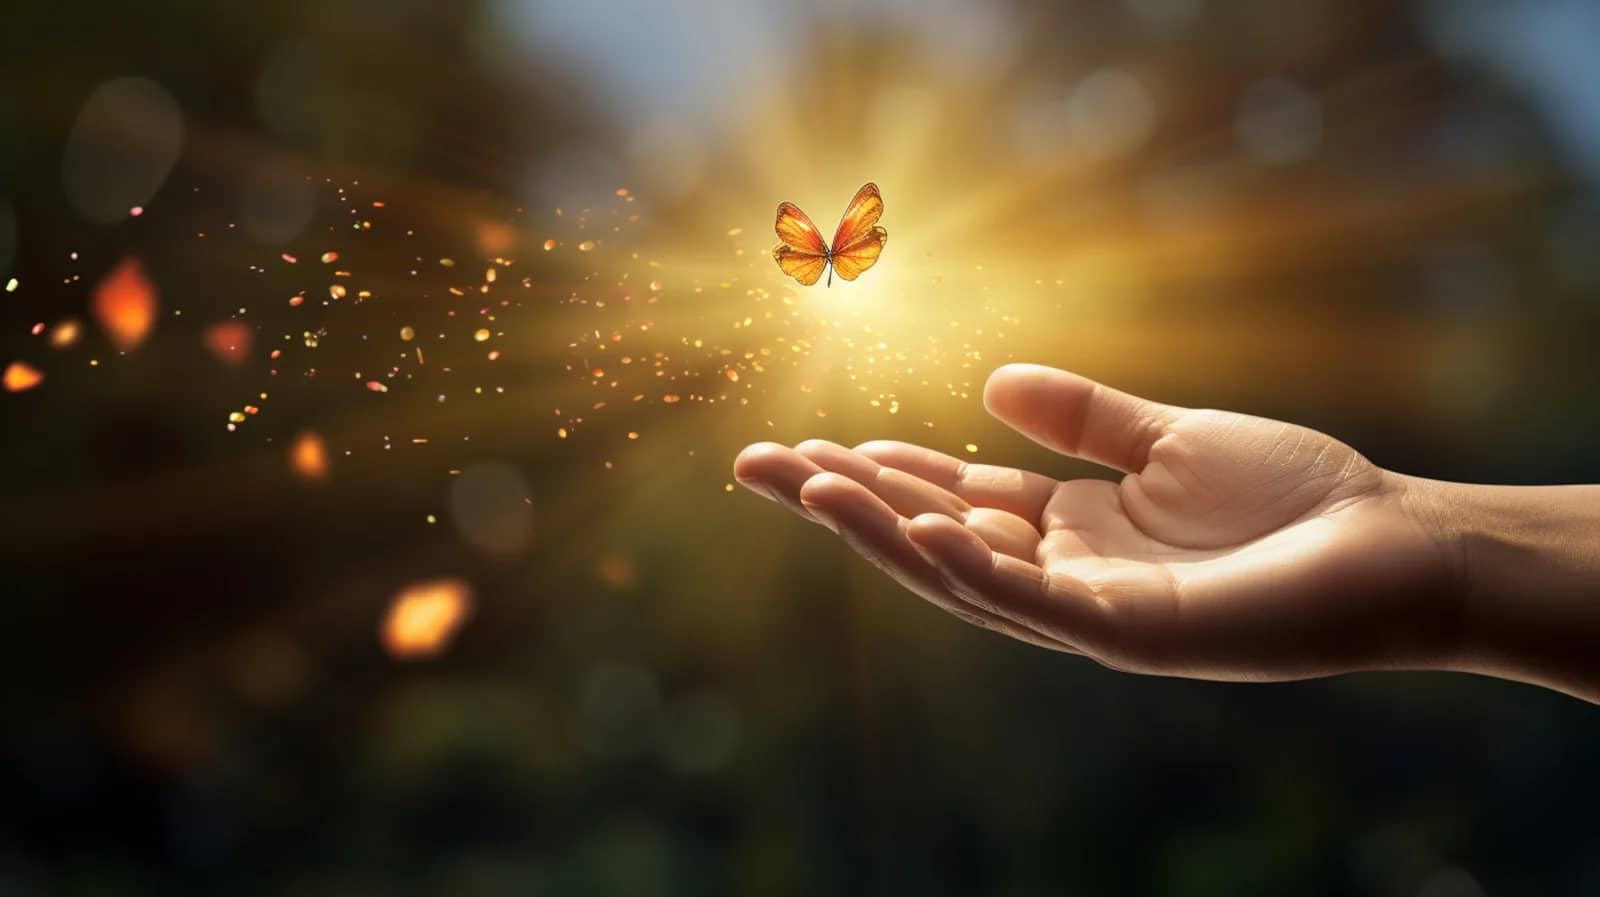 change my luck – hand opening out with a butterfly surrounded by light